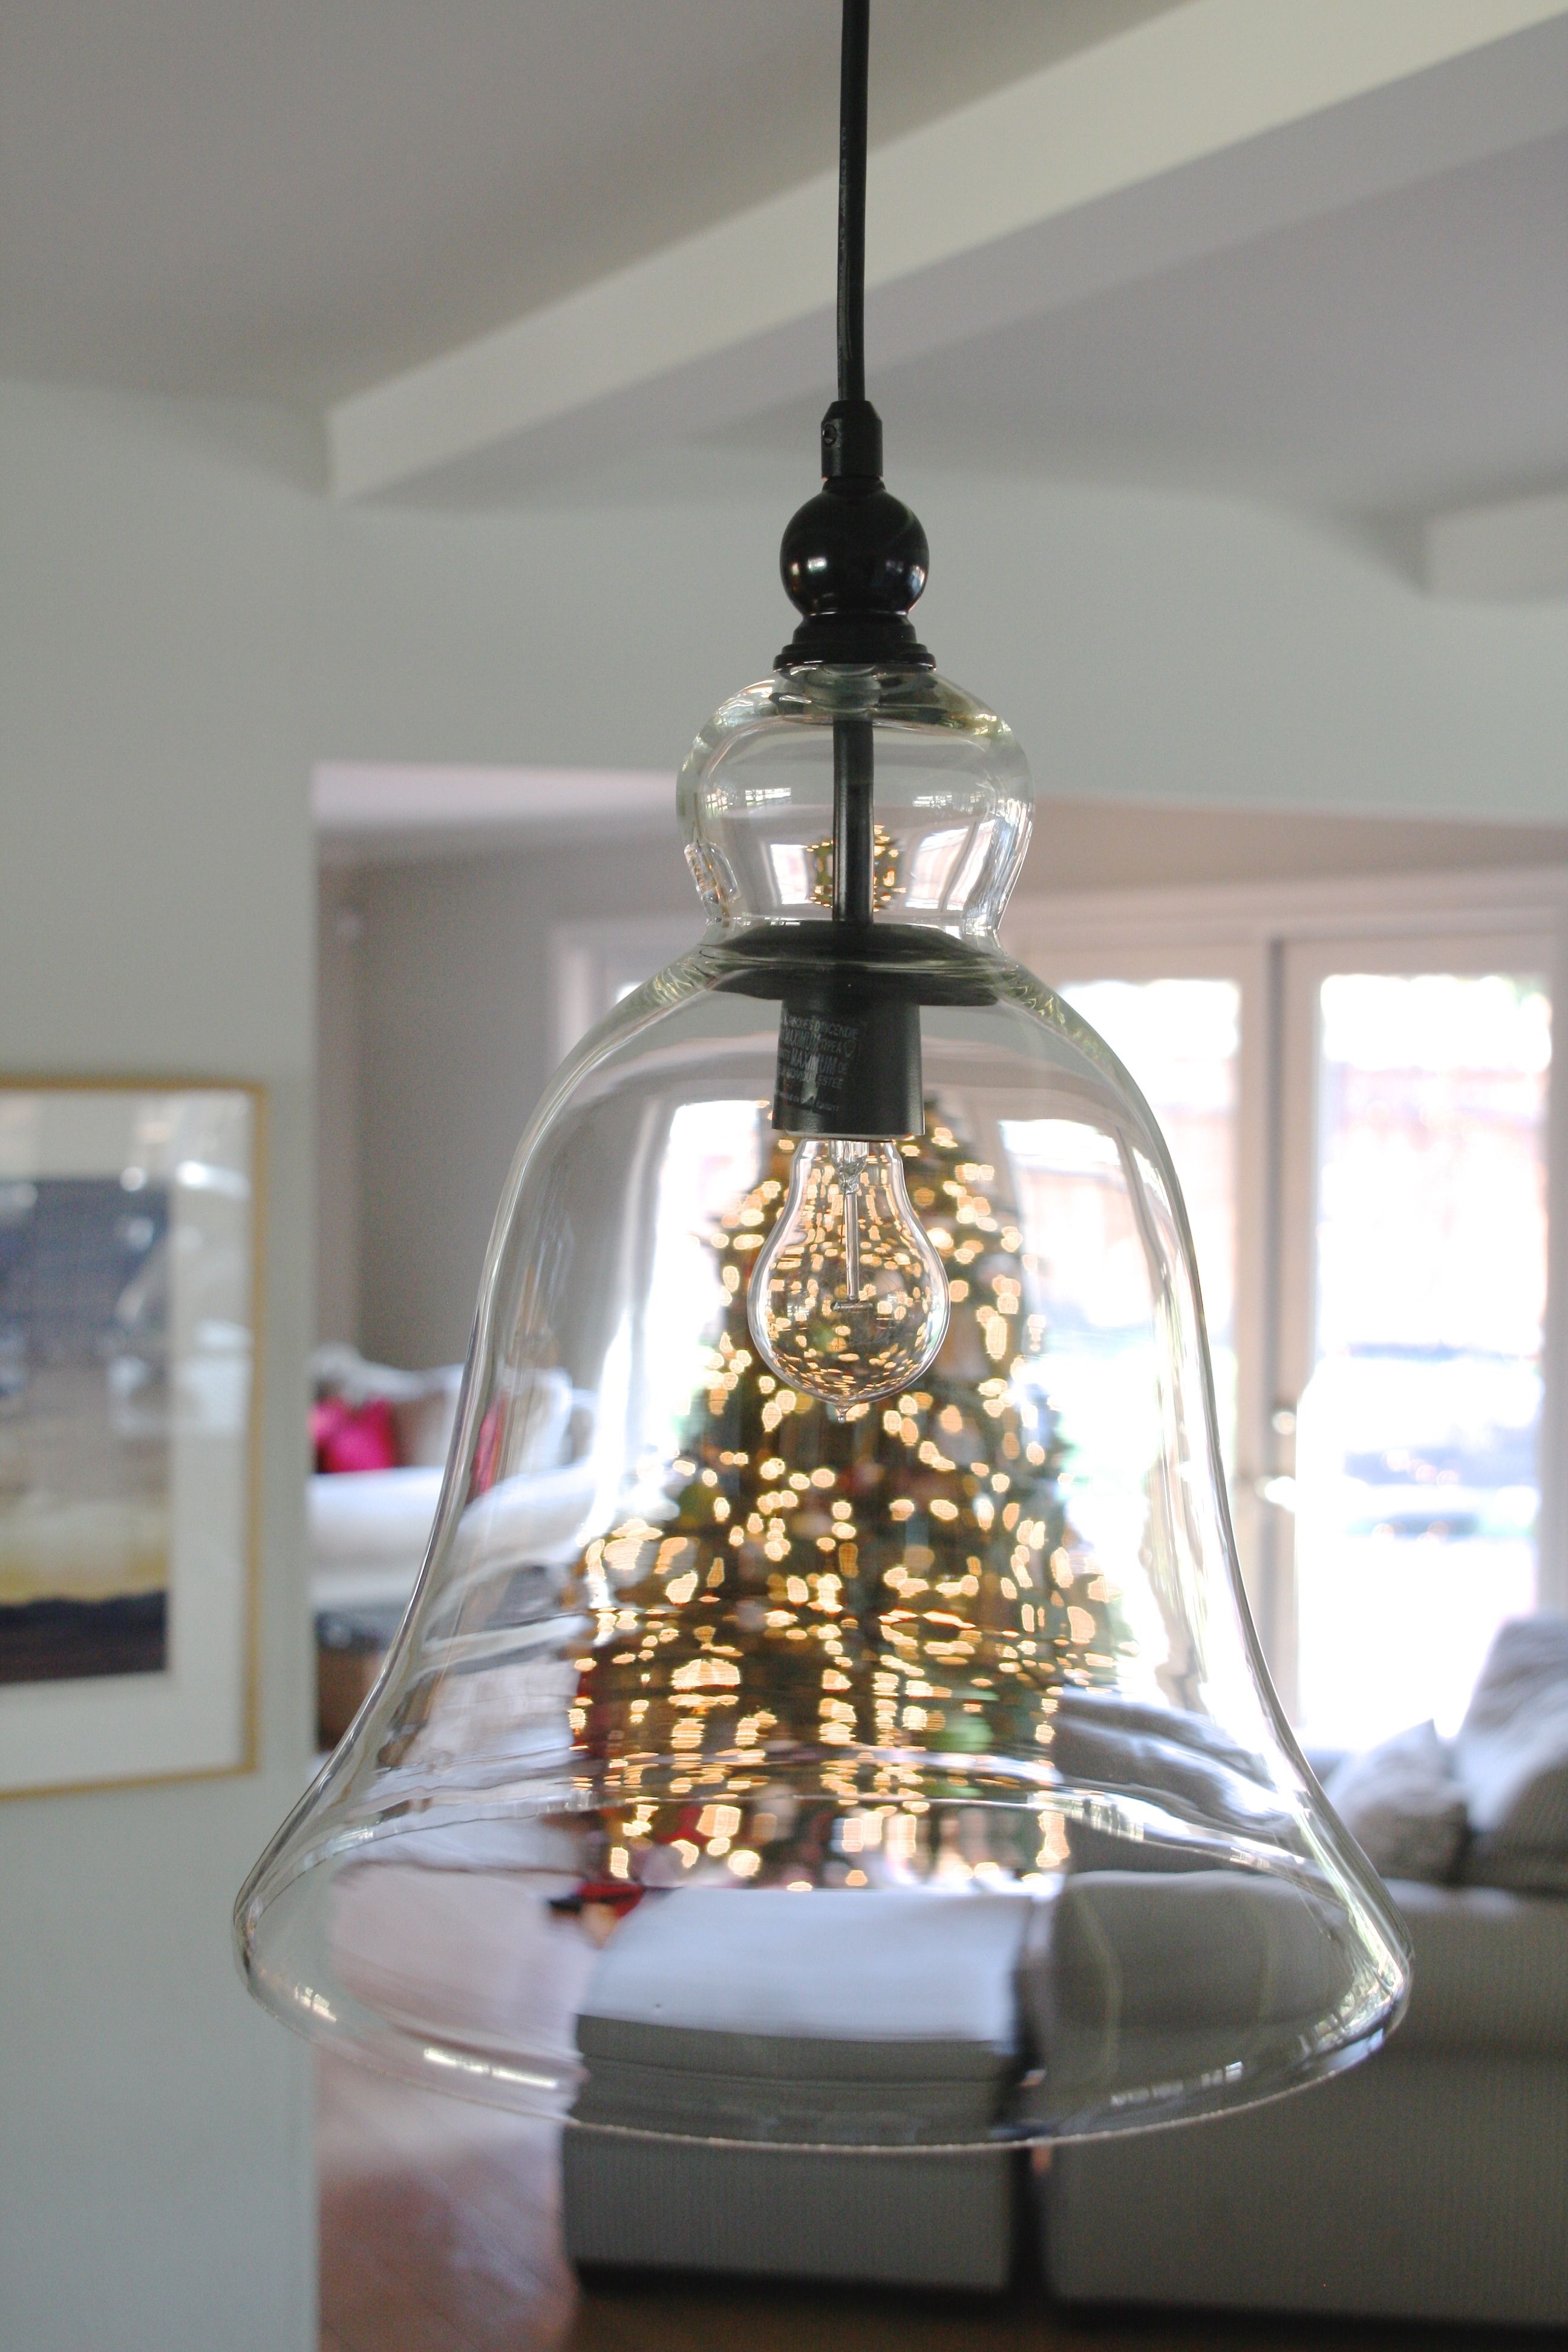 How To Clean Pottery Barn Rustic Pendant Lights – Simply Organized With Regard To Outdoor Lanterns At Pottery Barn (Photo 20 of 20)